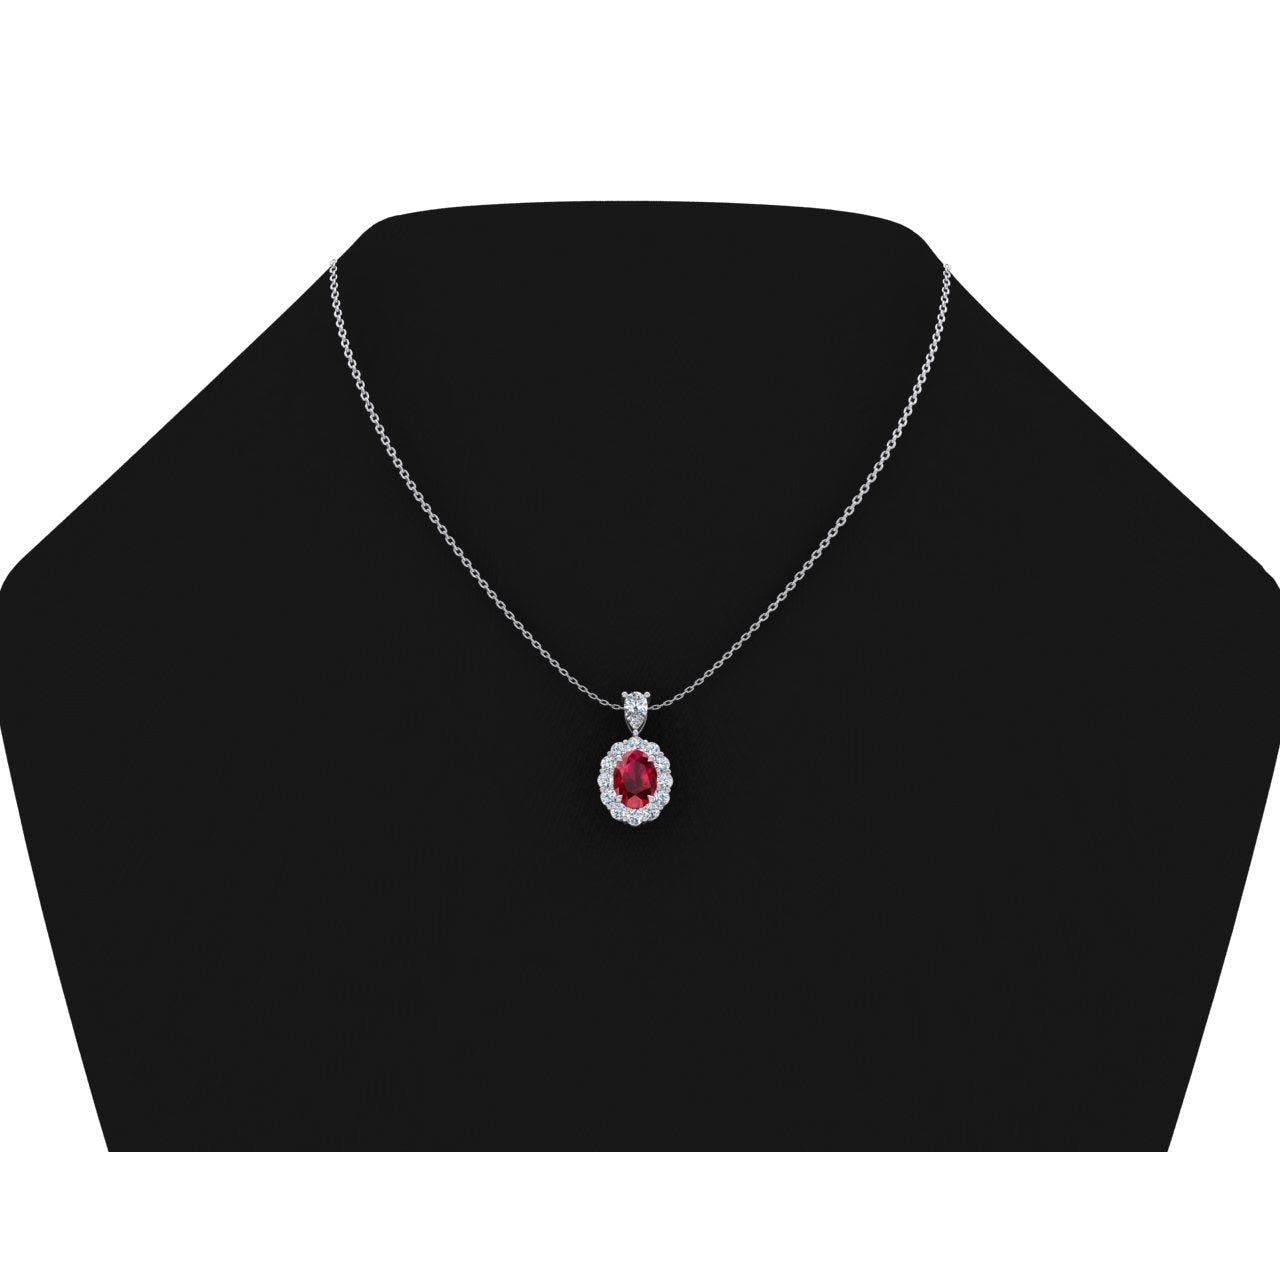 Eagle Claw Prongs Ruby Necklace Halo Gemstone Jewelry